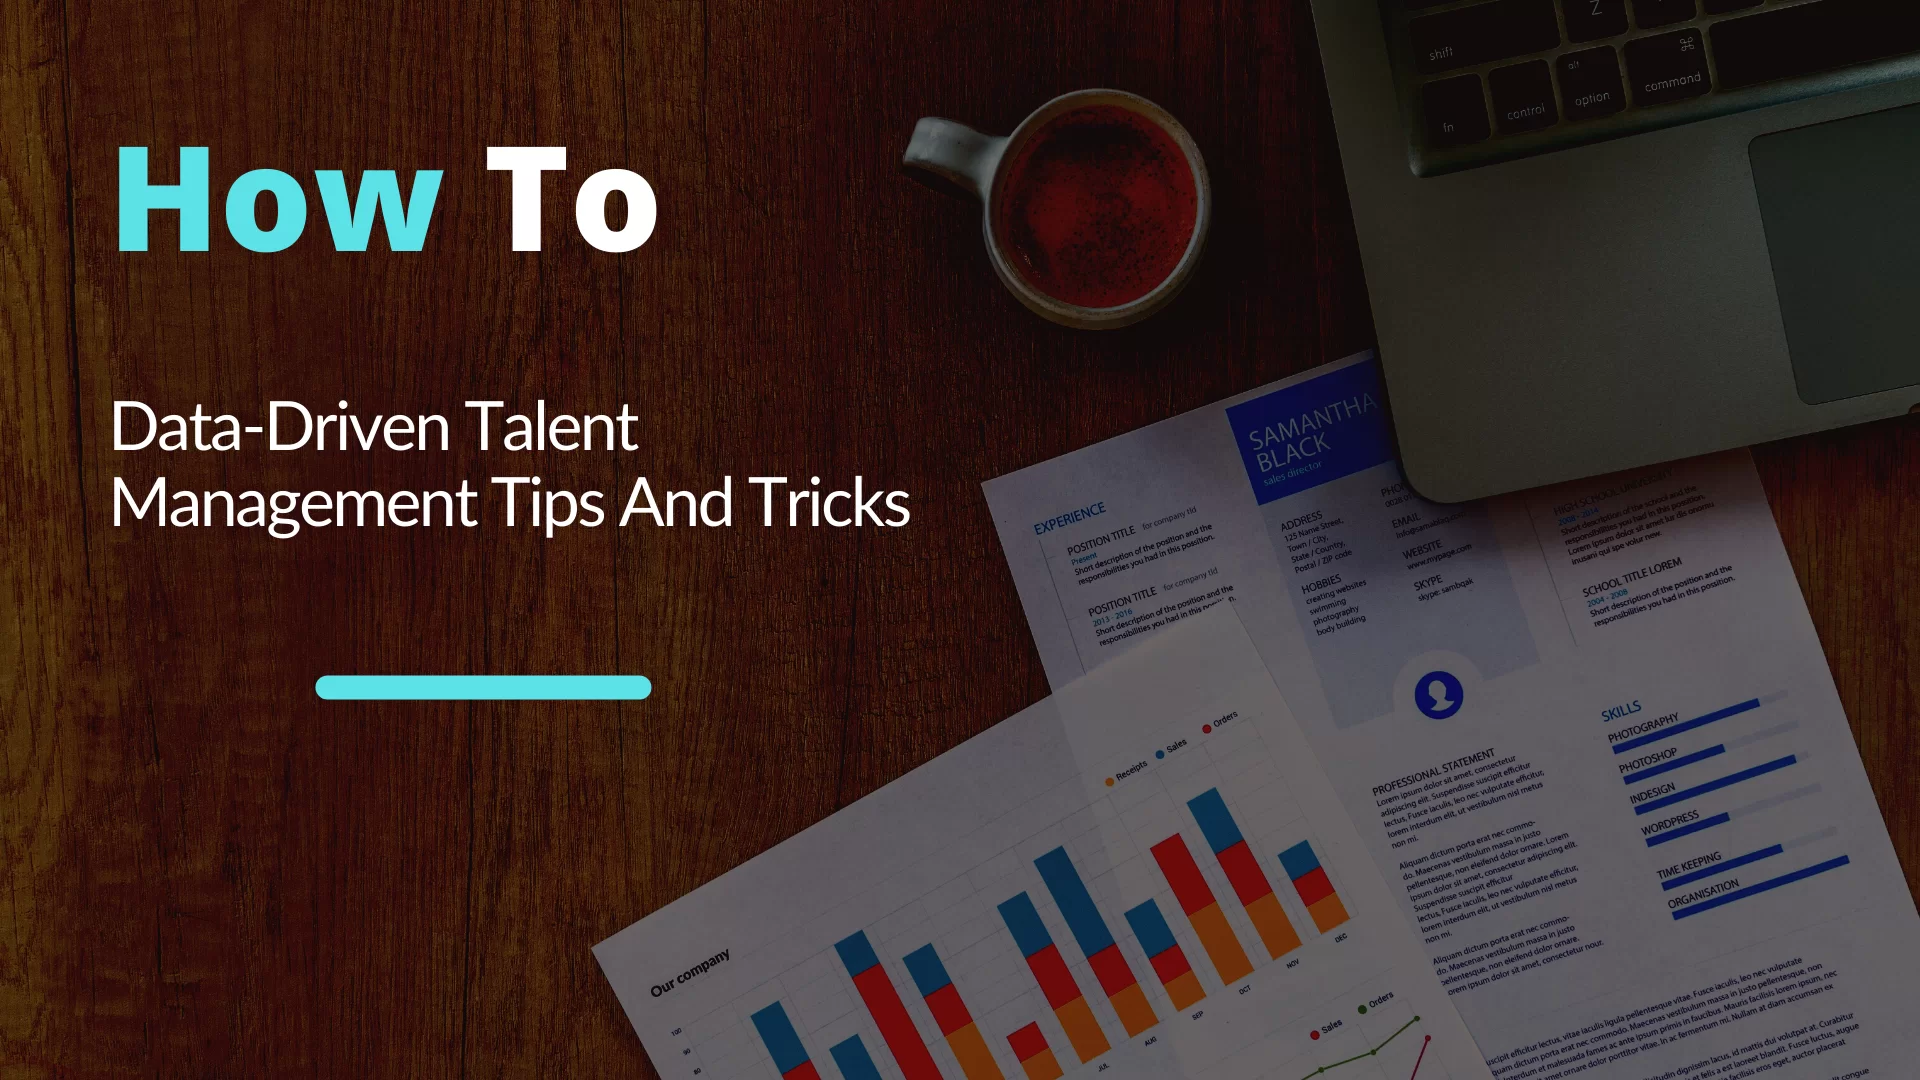 Data-Driven Talent Management Tips And Tricks